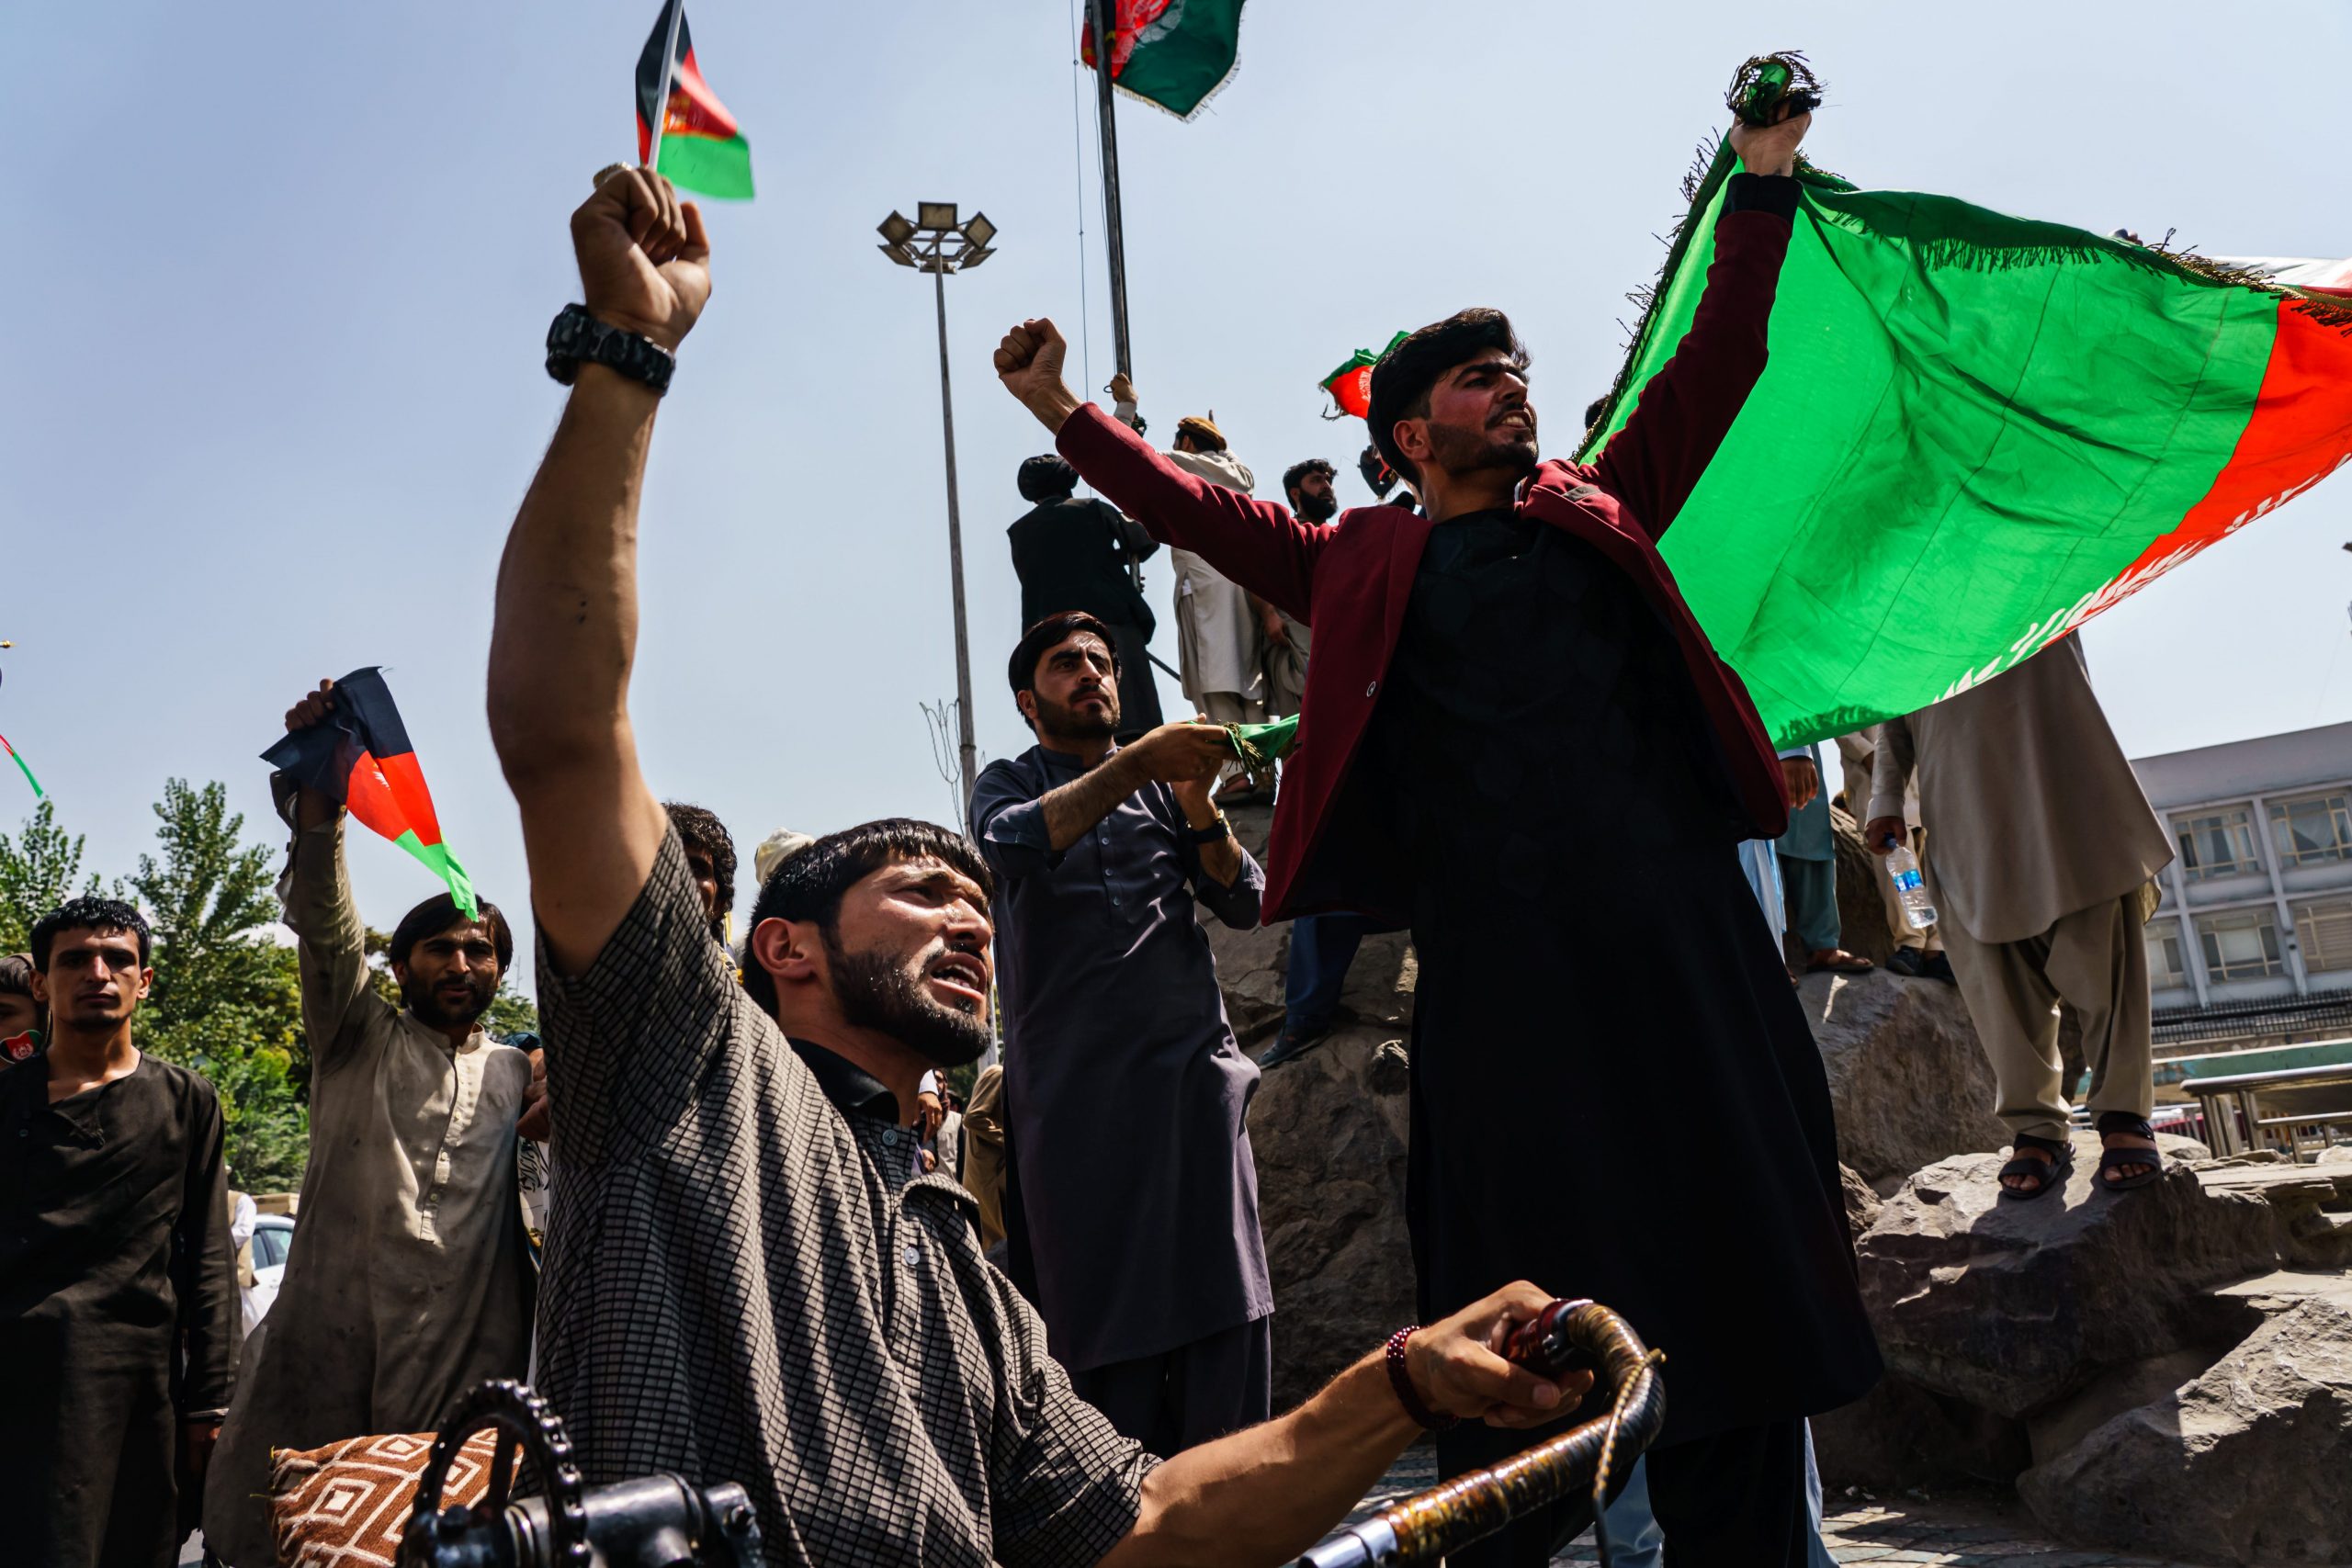 Afghans try to raise the national flag of the Islamic Republic of Afghanistan, despite the presence of Taliban fighters around them, during a rally for Independence Day at Pashtunistan Square in Kabul, Afghanistan, Thursday, Aug. 19, 2021